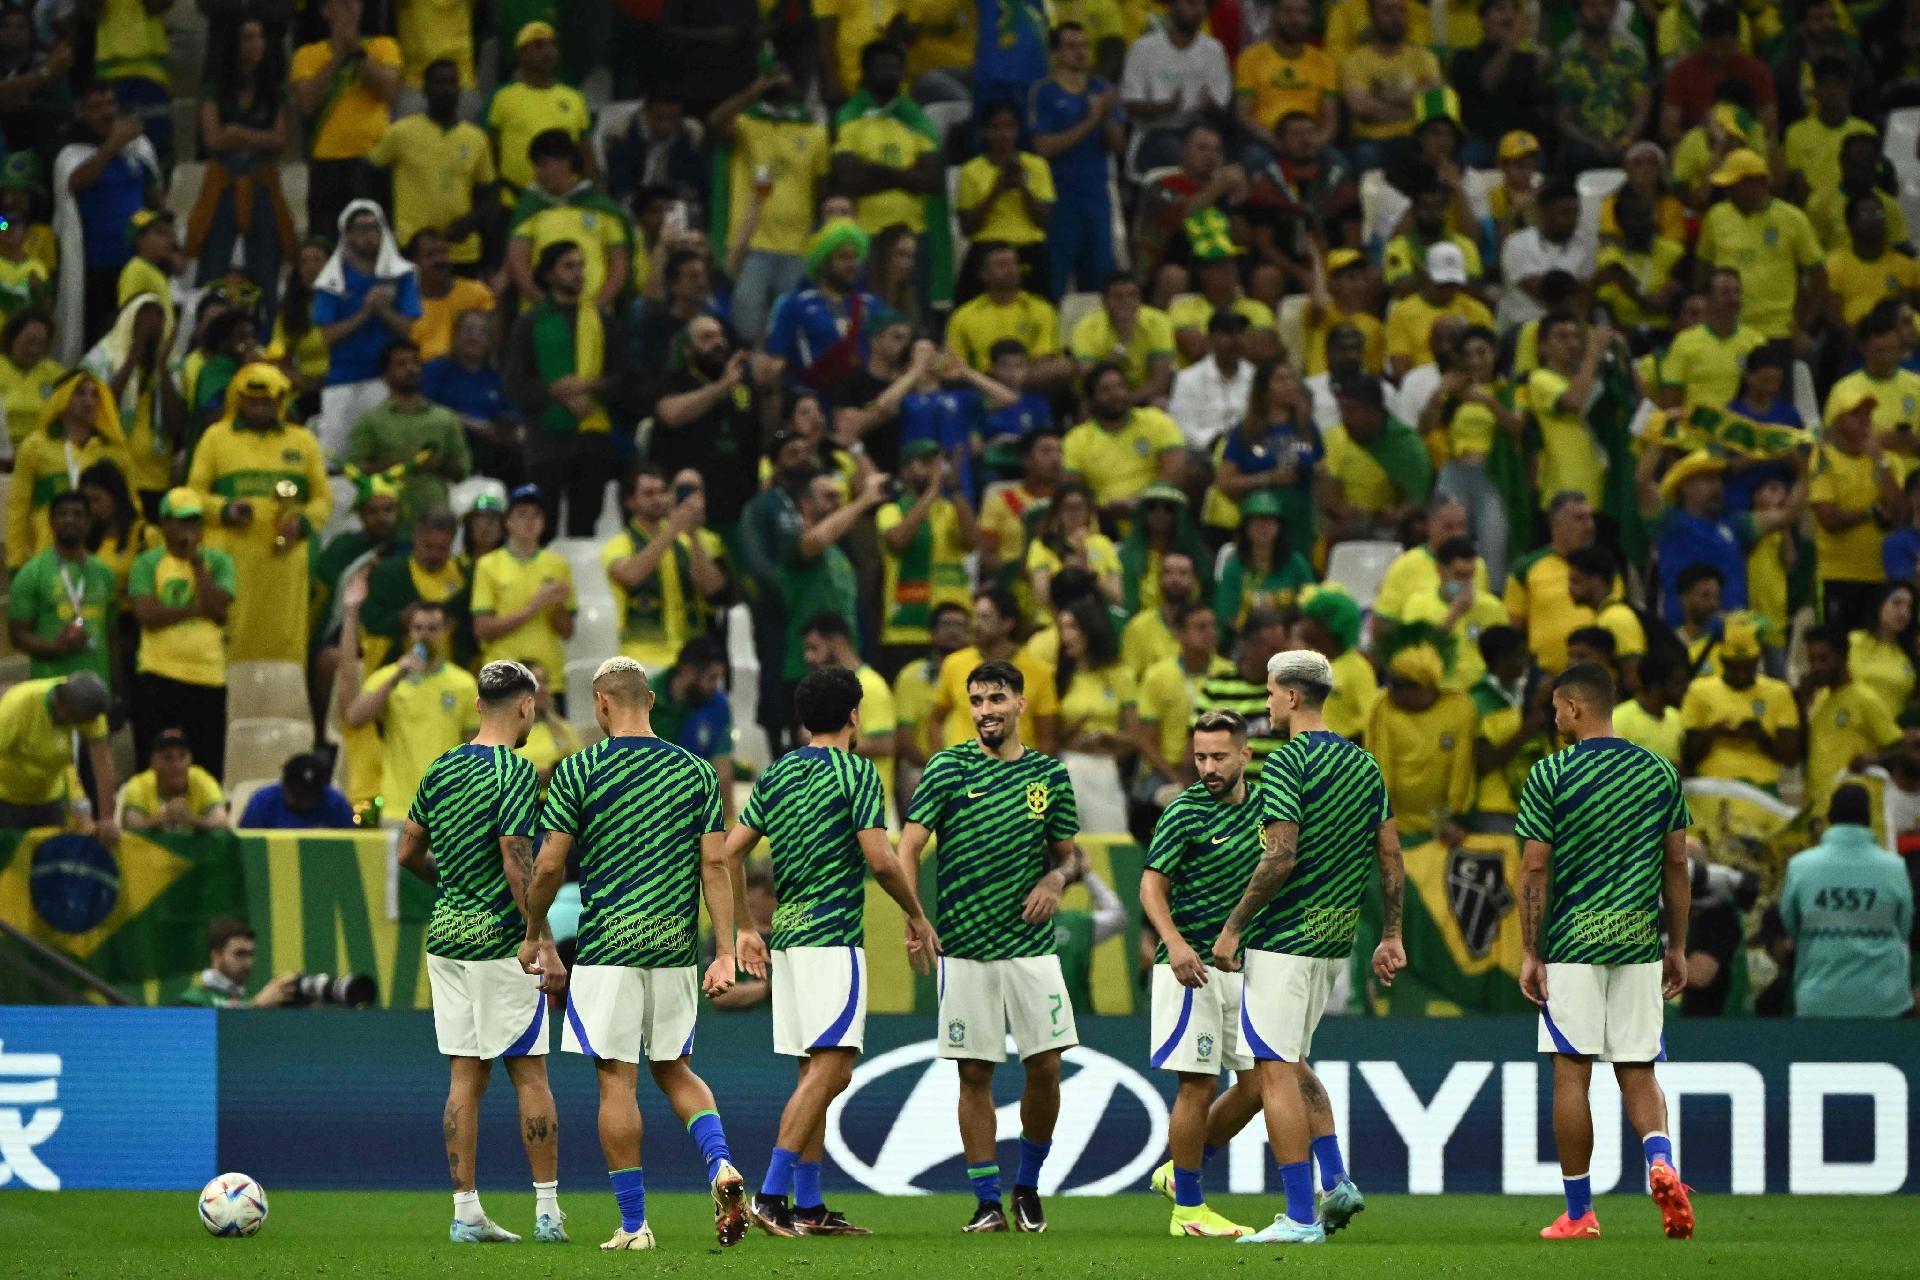 Brazilian players warming up before the match against Cameroon - Jewel SAMAD / AFP